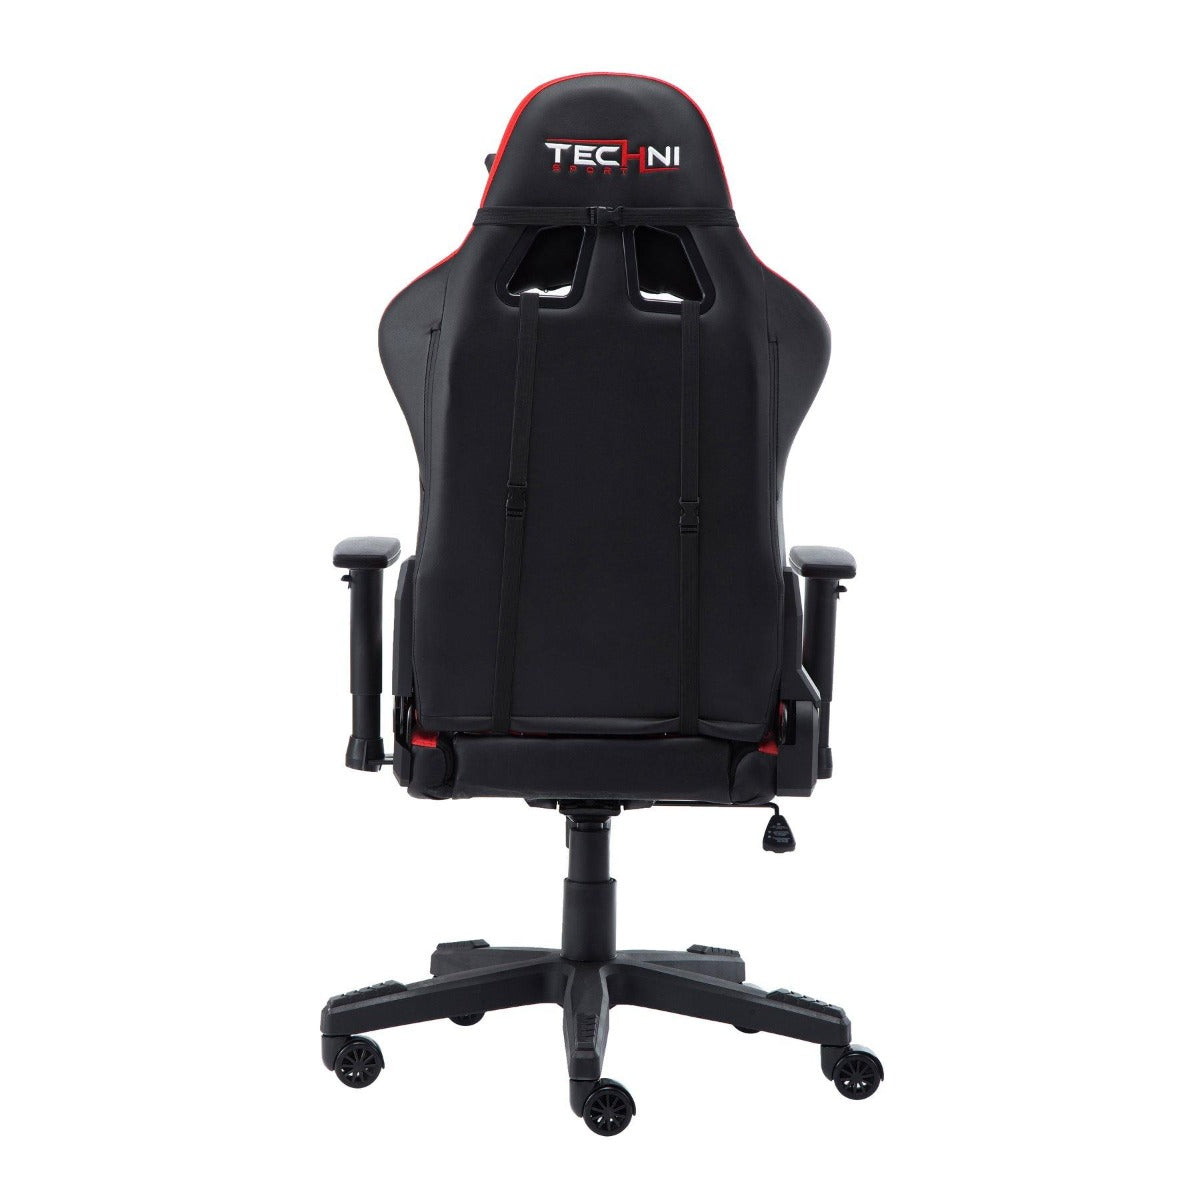 Techni Sport TS-90 Red Office-PC Gaming Chair RTA-TS90-RED Back